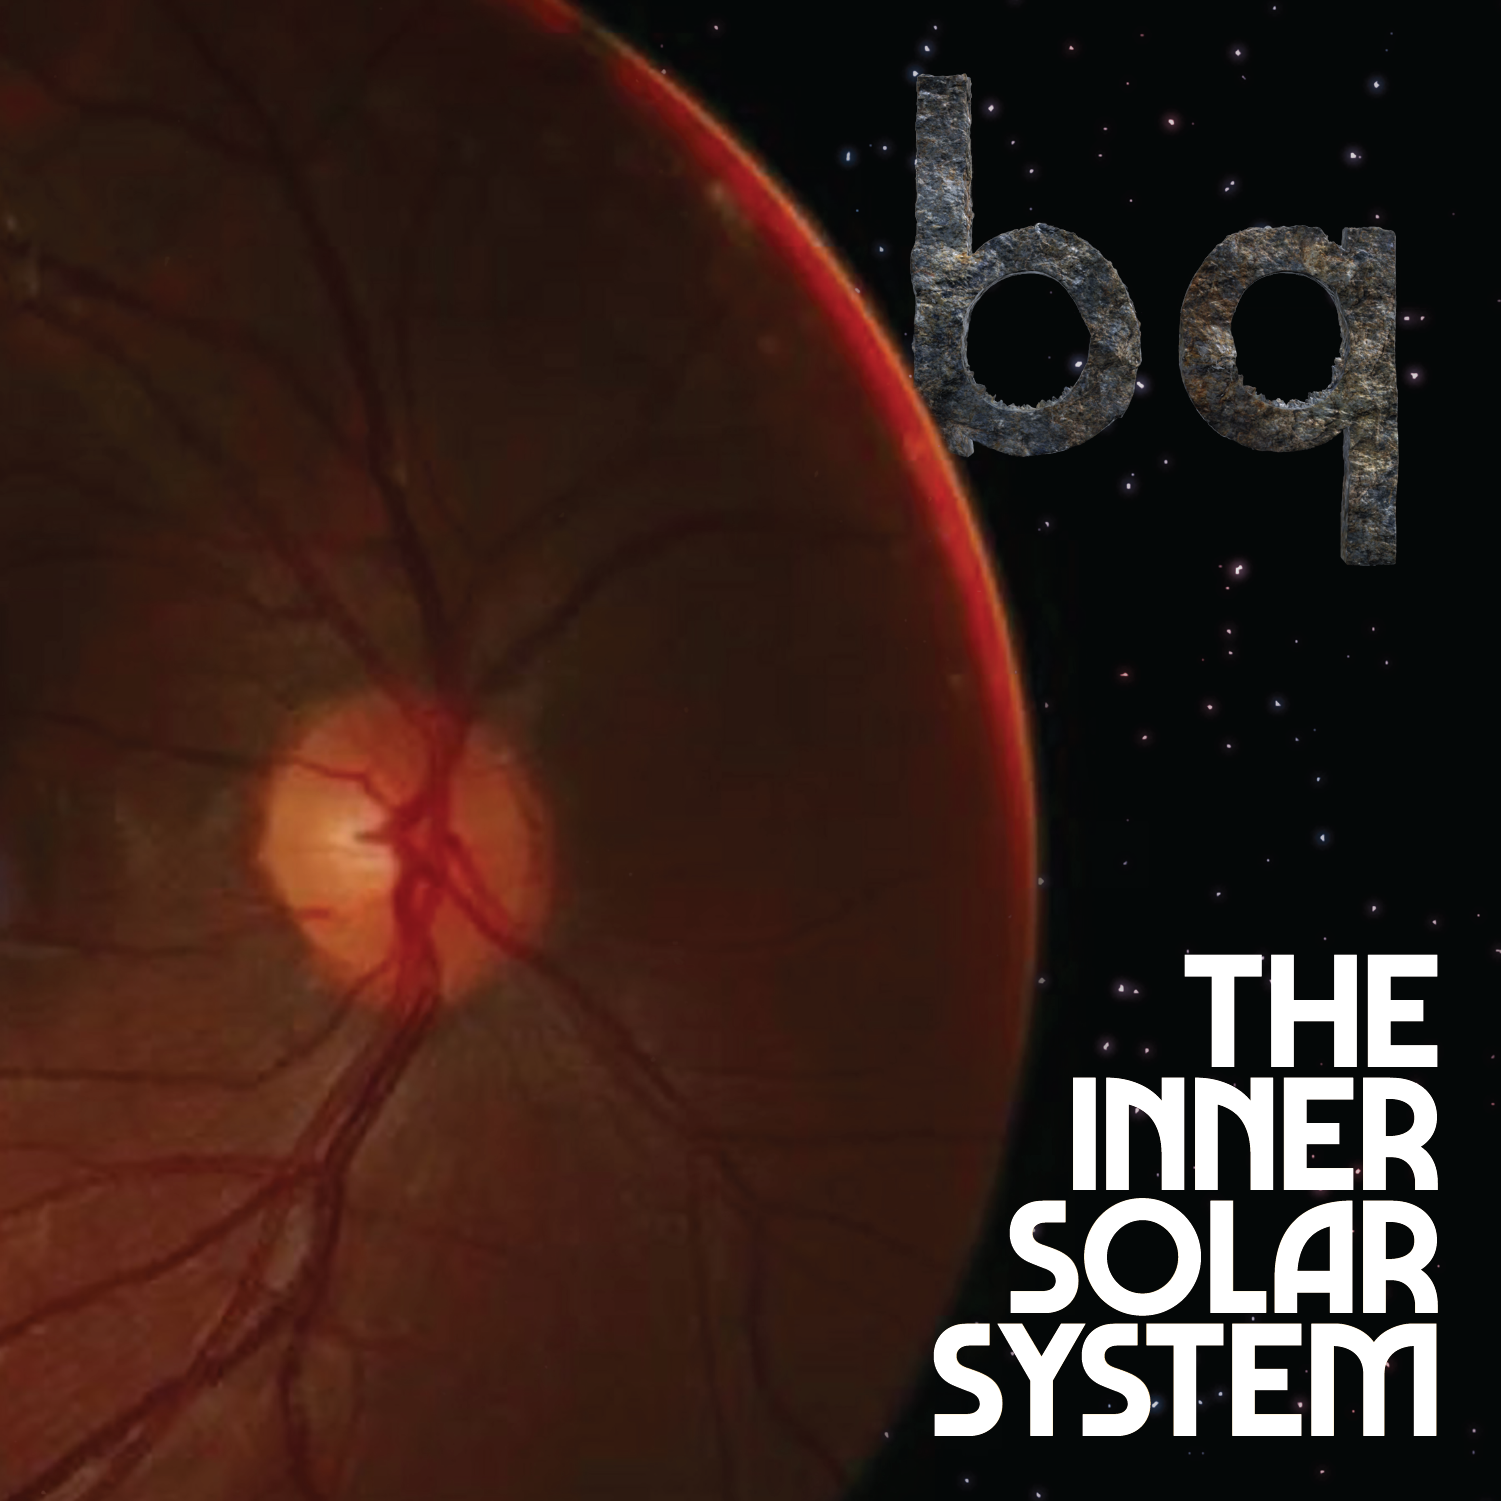 album cover with retinal scan as a planet, the band name 'bq' rendered in stone, and a sea of faraway stars